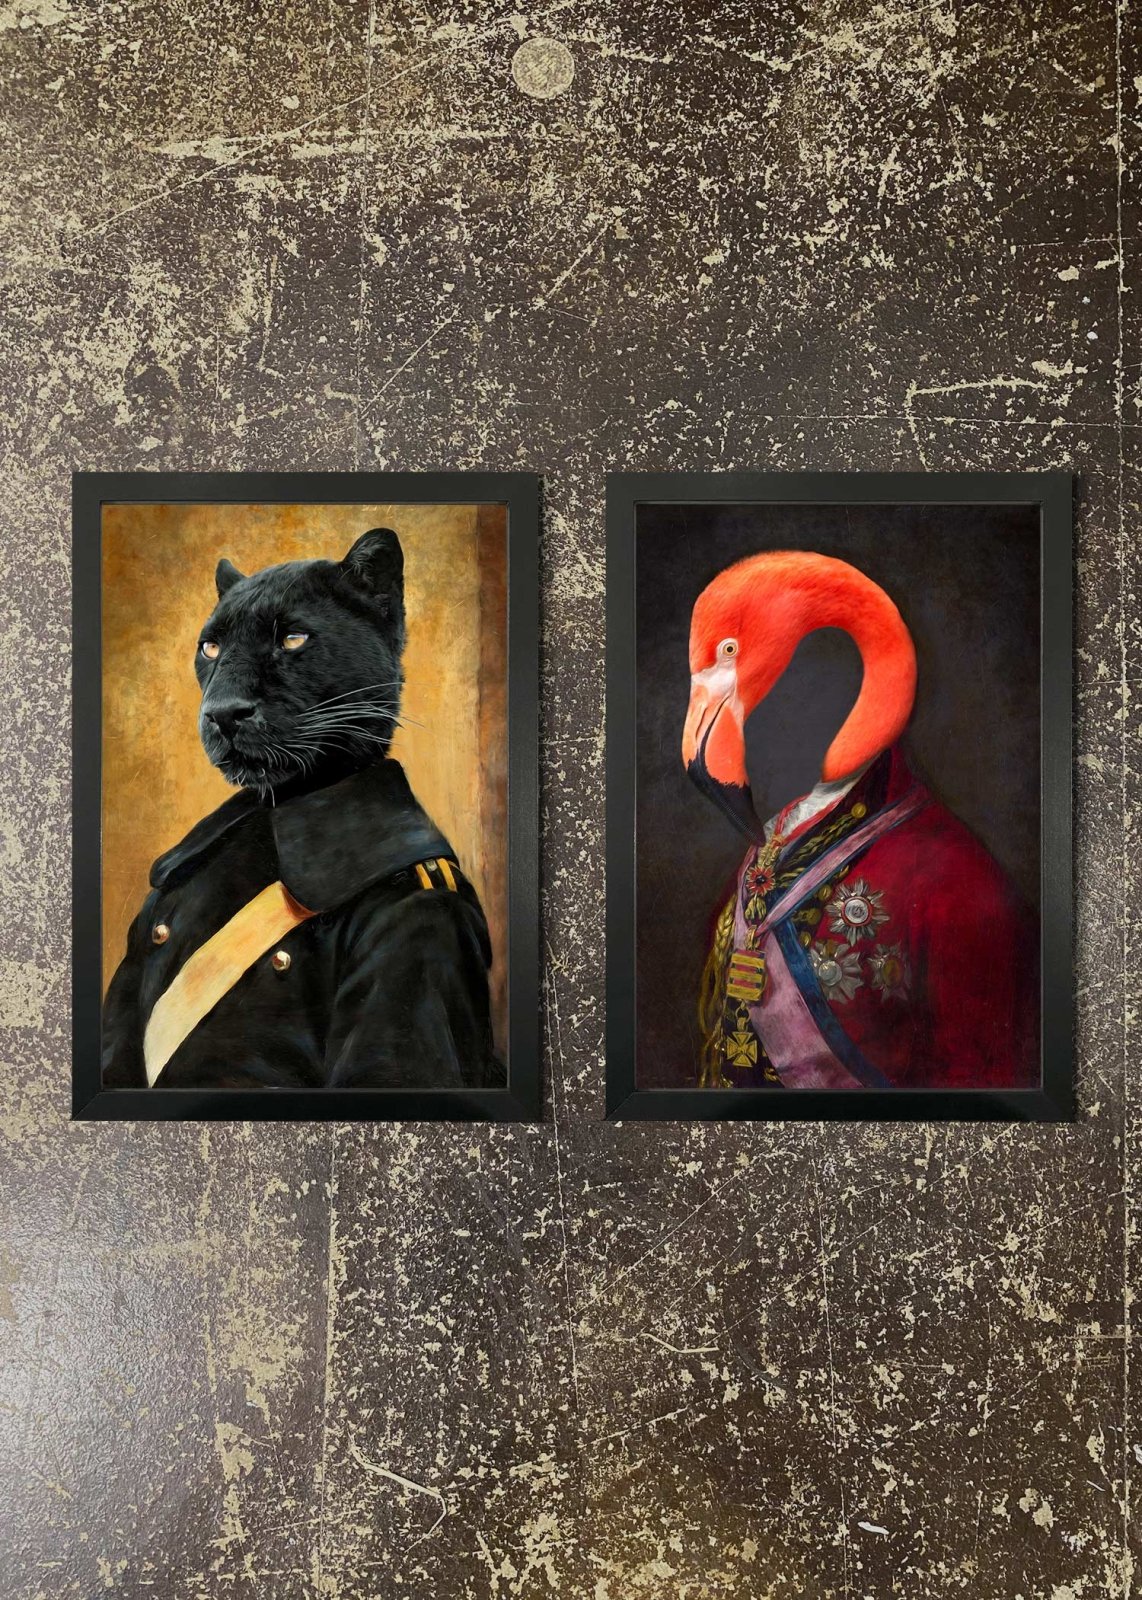 2 Framed 21x30cm Prints - Panther and Flamingo Portraits